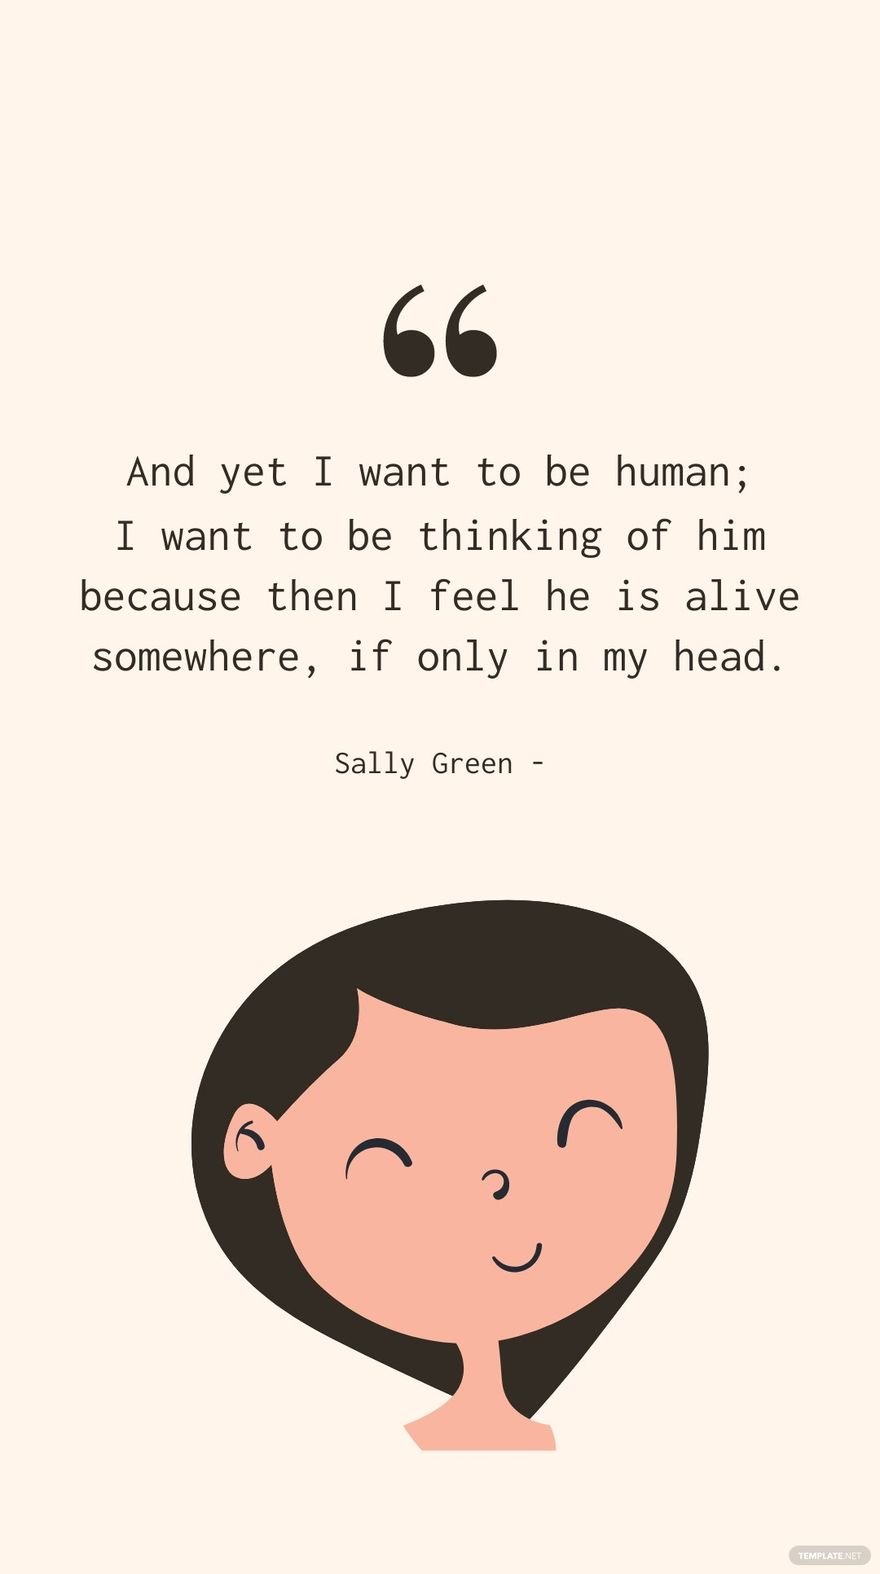 Sally Green - And yet I want to be human; I want to be thinking of him because then I feel he is alive somewhere, if only in my head.